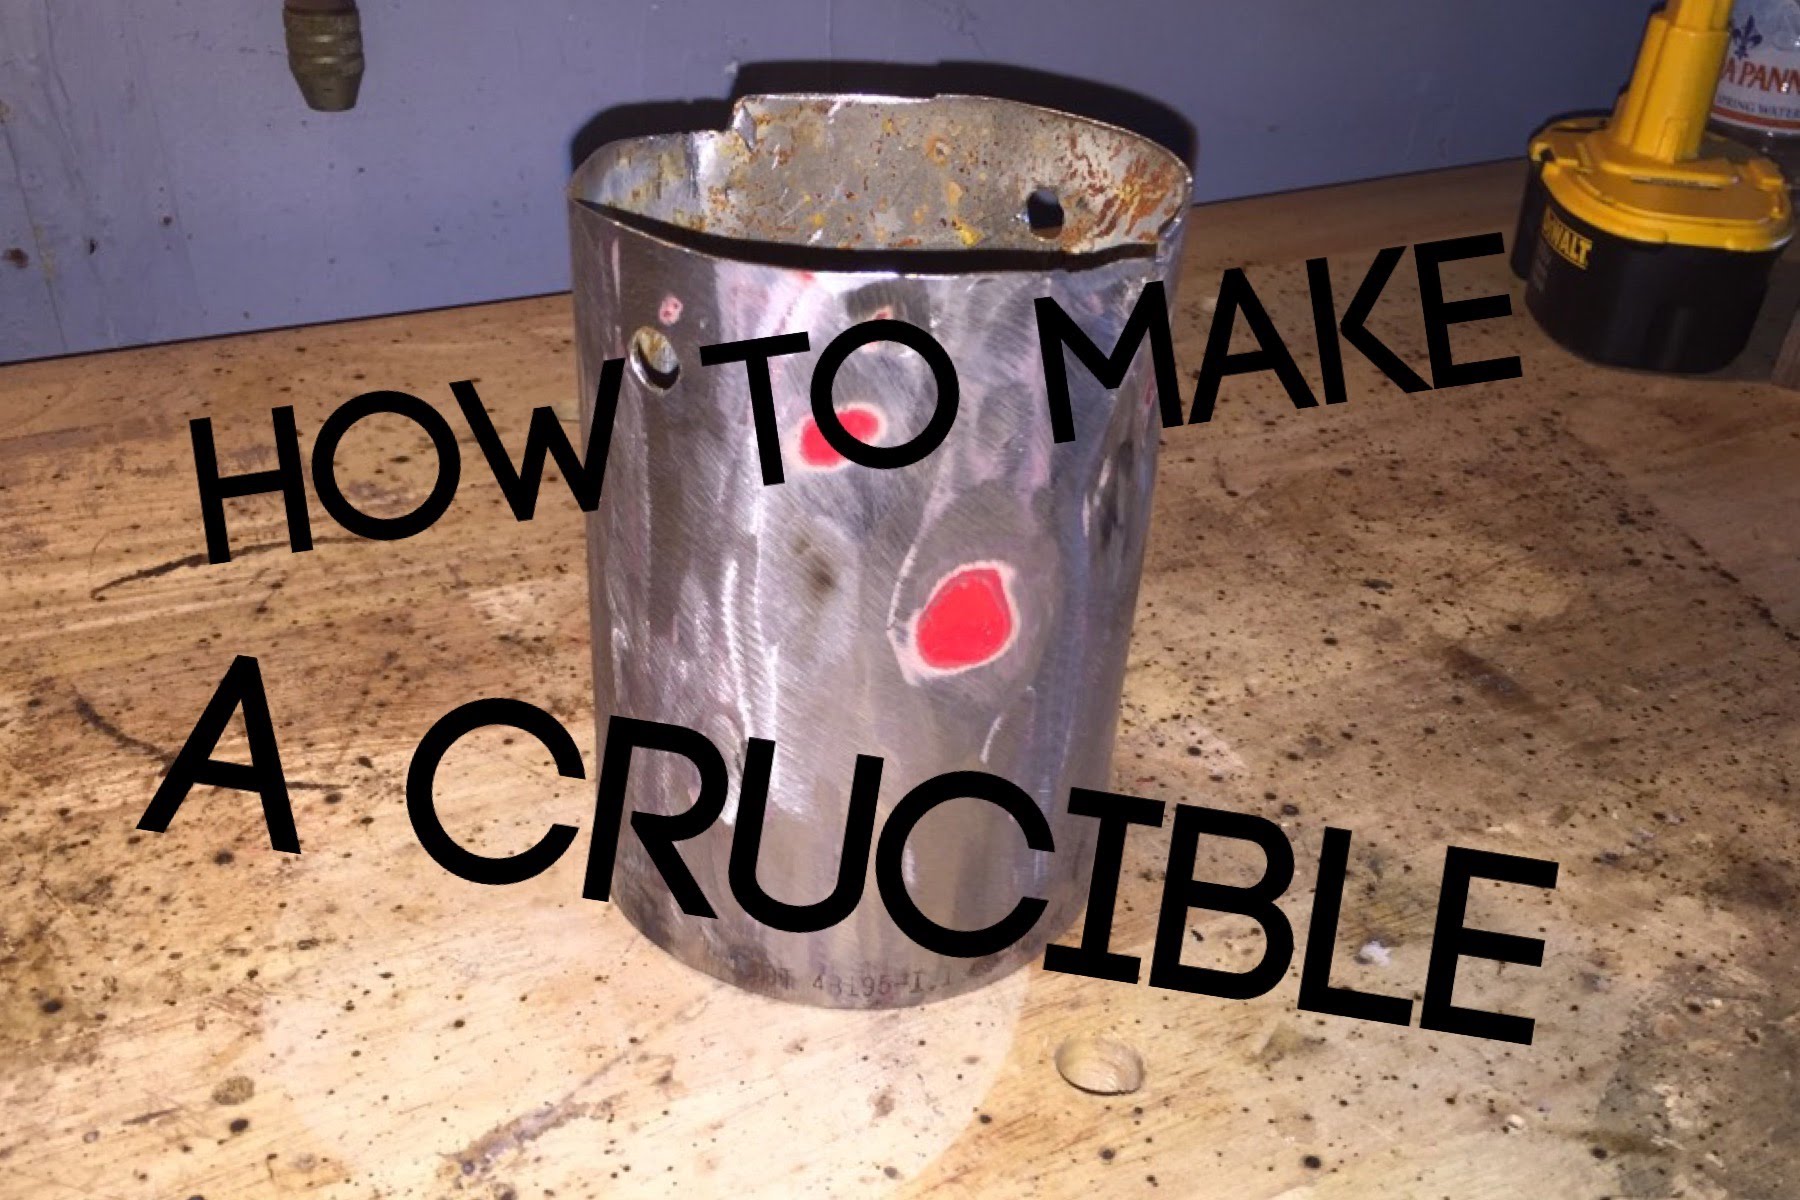 How to Make a Crucible from a Fire Extinguisher - YouTube